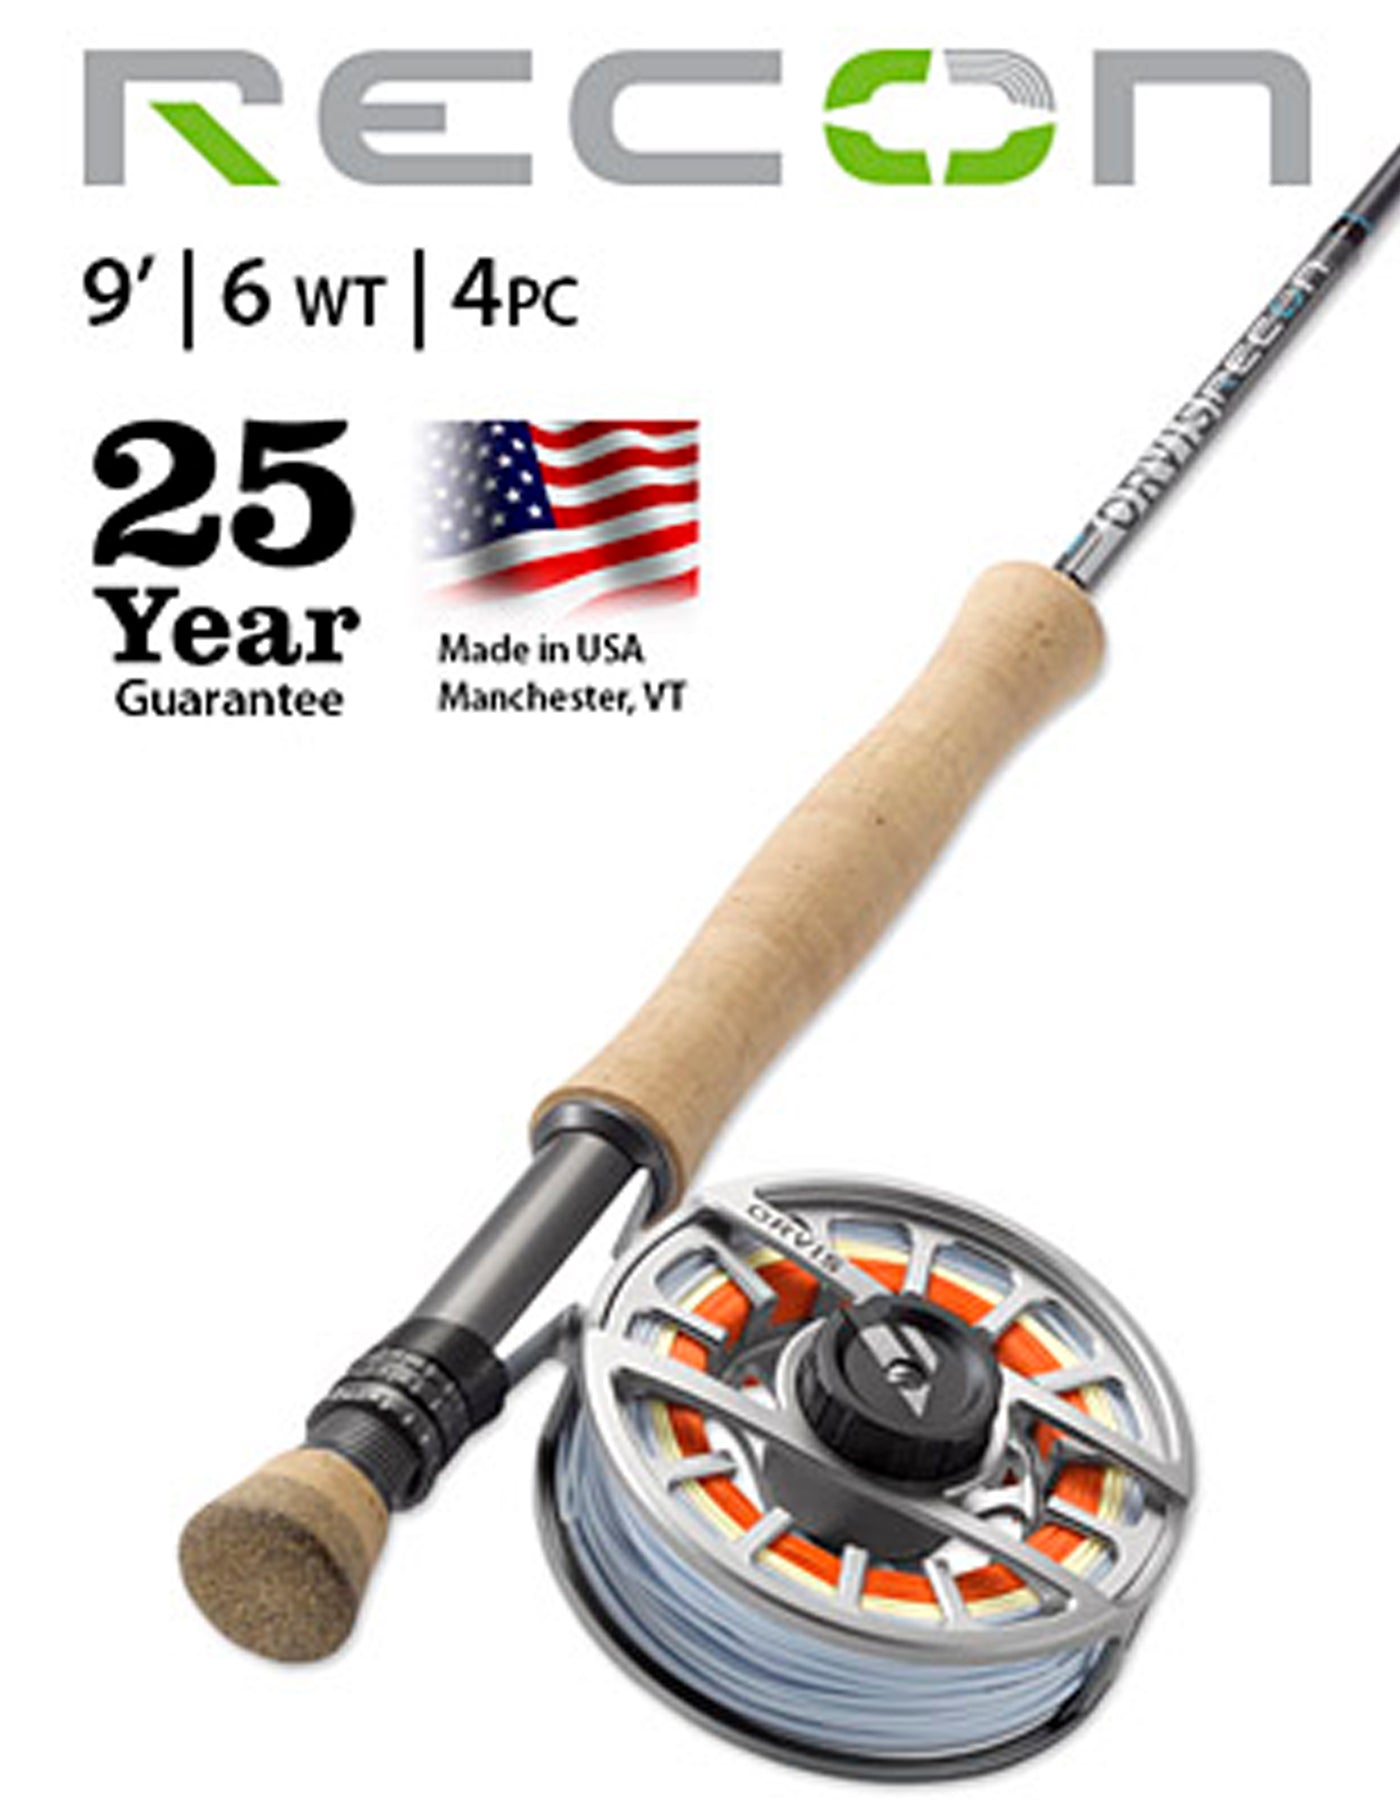 Airflo Saltwater Rods and Combos - 8wt, 9wt and 10wt – essential Flyfisher